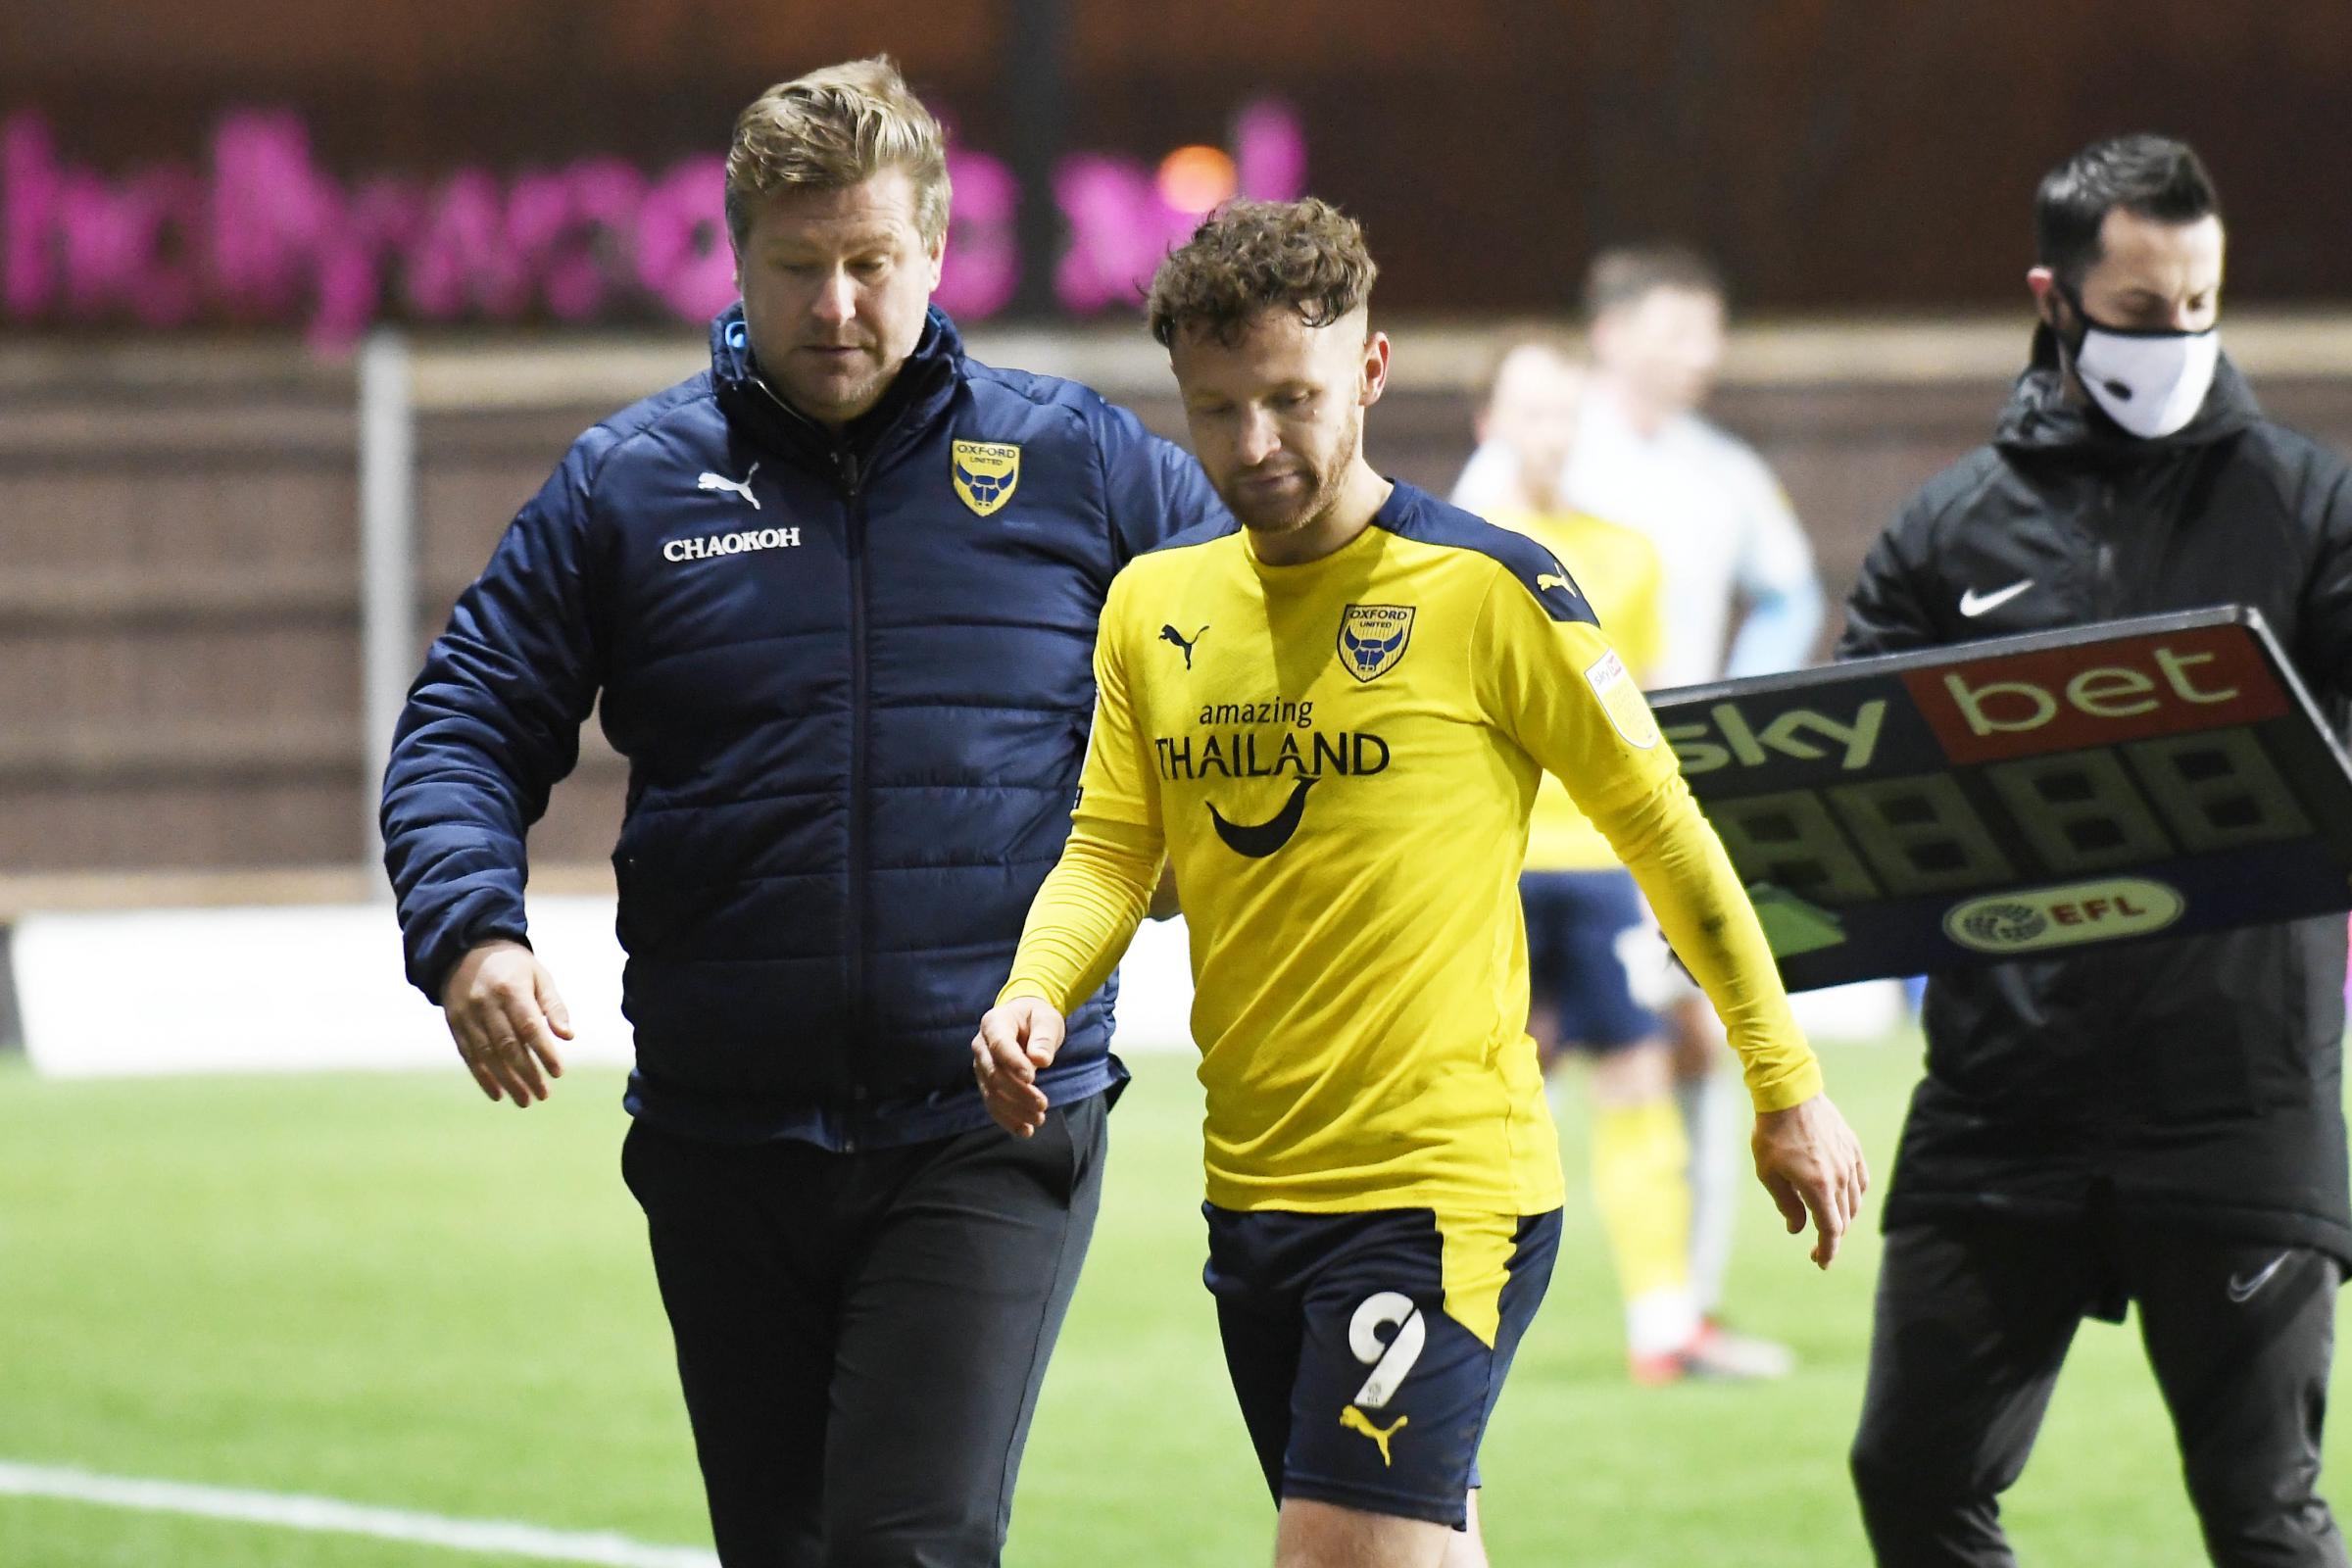 Oxford United's Matty Taylor avoids FA charge for grab on Ronan Curtis